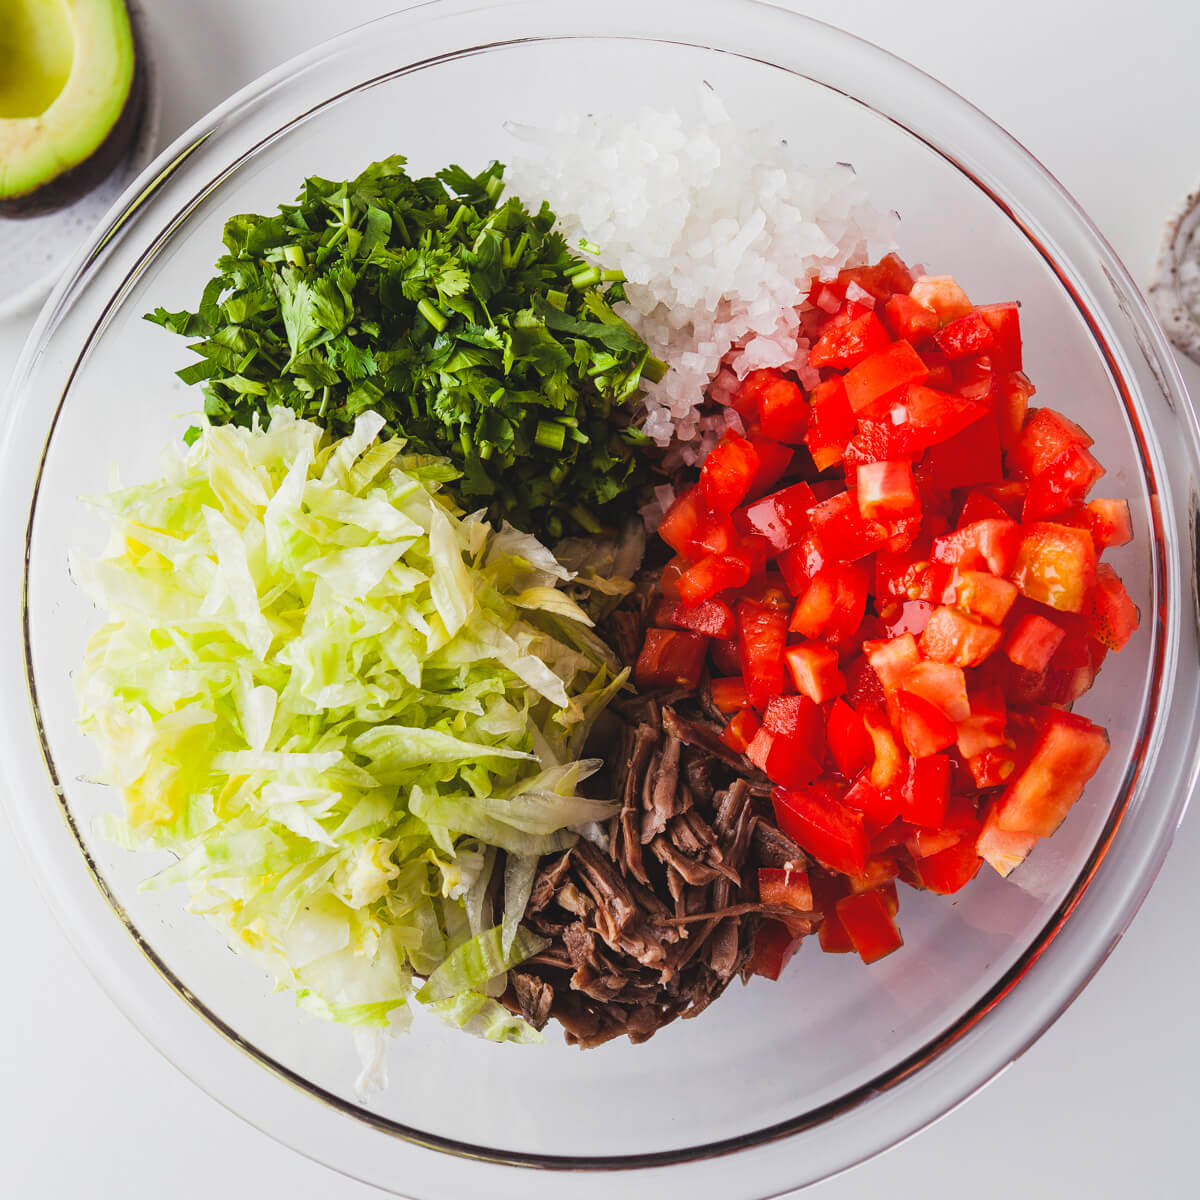 Ingredients for Salpicón (Mexican Shredded Meat Salad) before being mixed together.